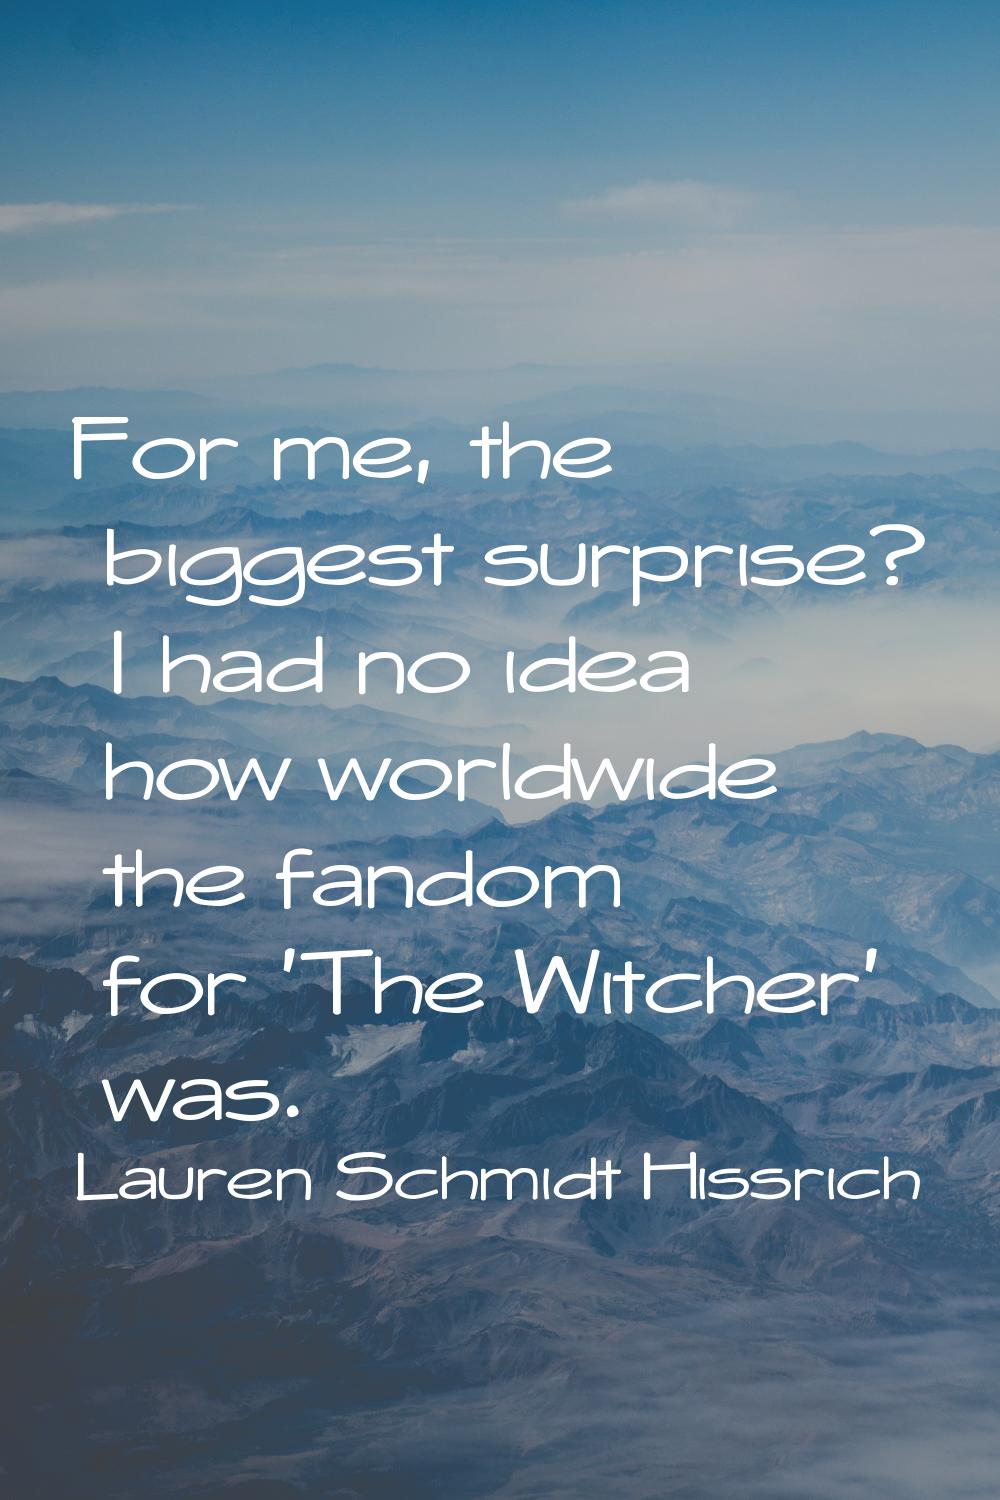 For me, the biggest surprise? I had no idea how worldwide the fandom for 'The Witcher' was.